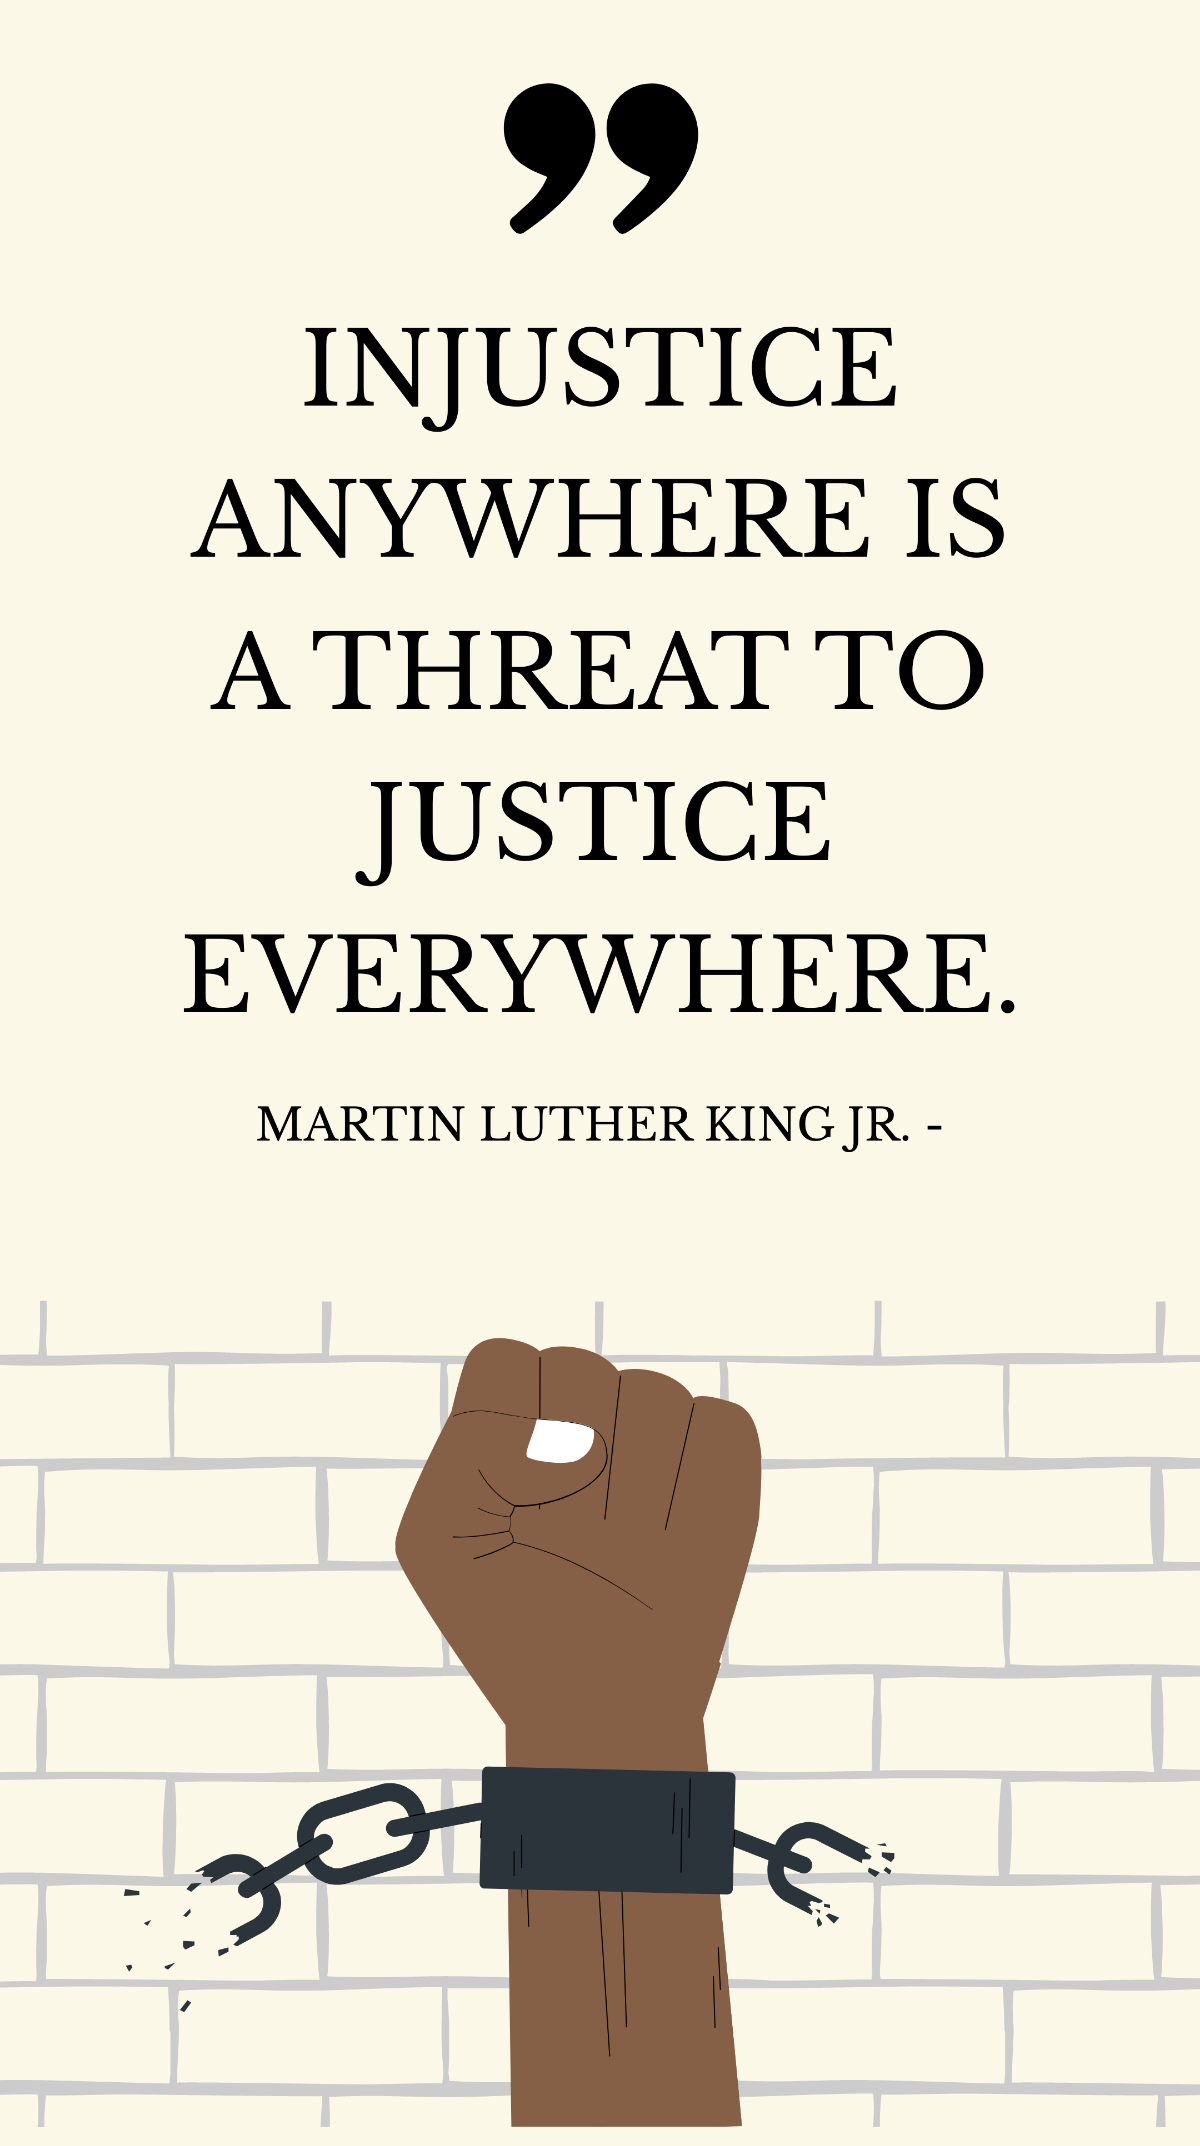 Free Martin Luther King Jr. - Injustice anywhere is a threat to justice everywhere. Template